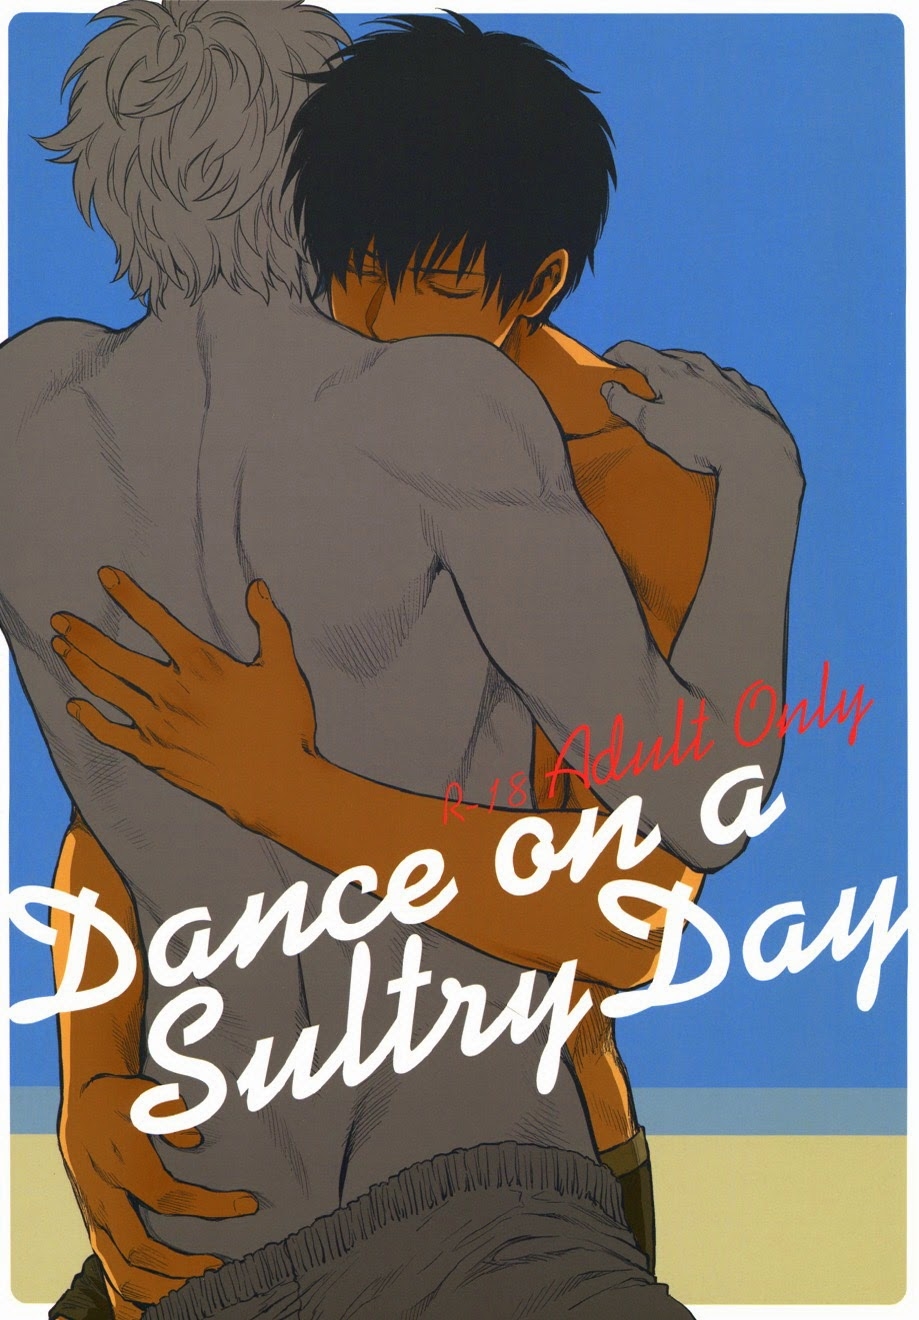 [3745HOUSE (Mikami Takeru)] Dance on a SultryDay (Gintama) [English] 0